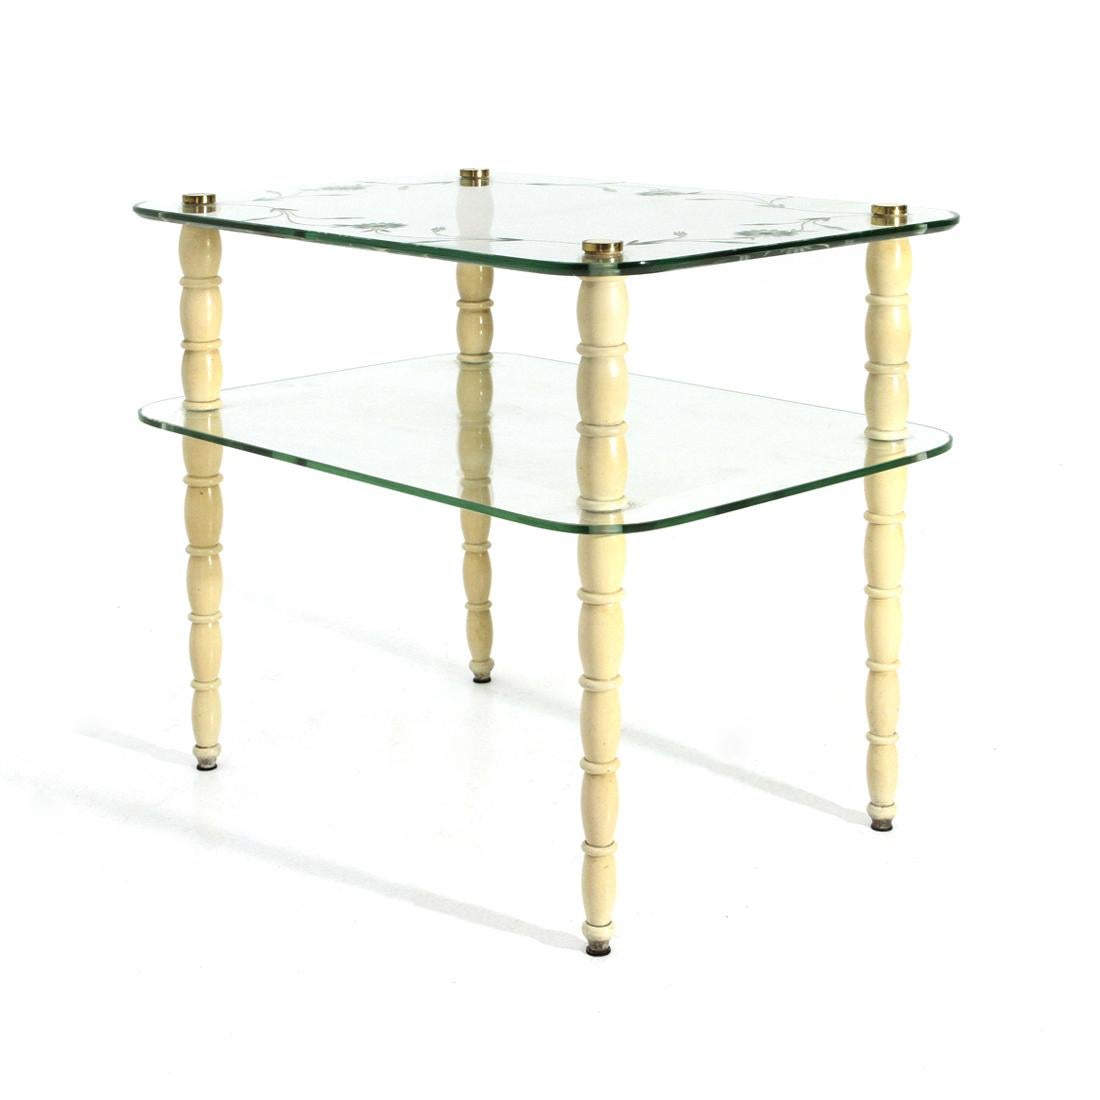 Mid-Century Modern Coffee Table with Legs in White Lacquered Wood and Glass Tops, 1930s For Sale